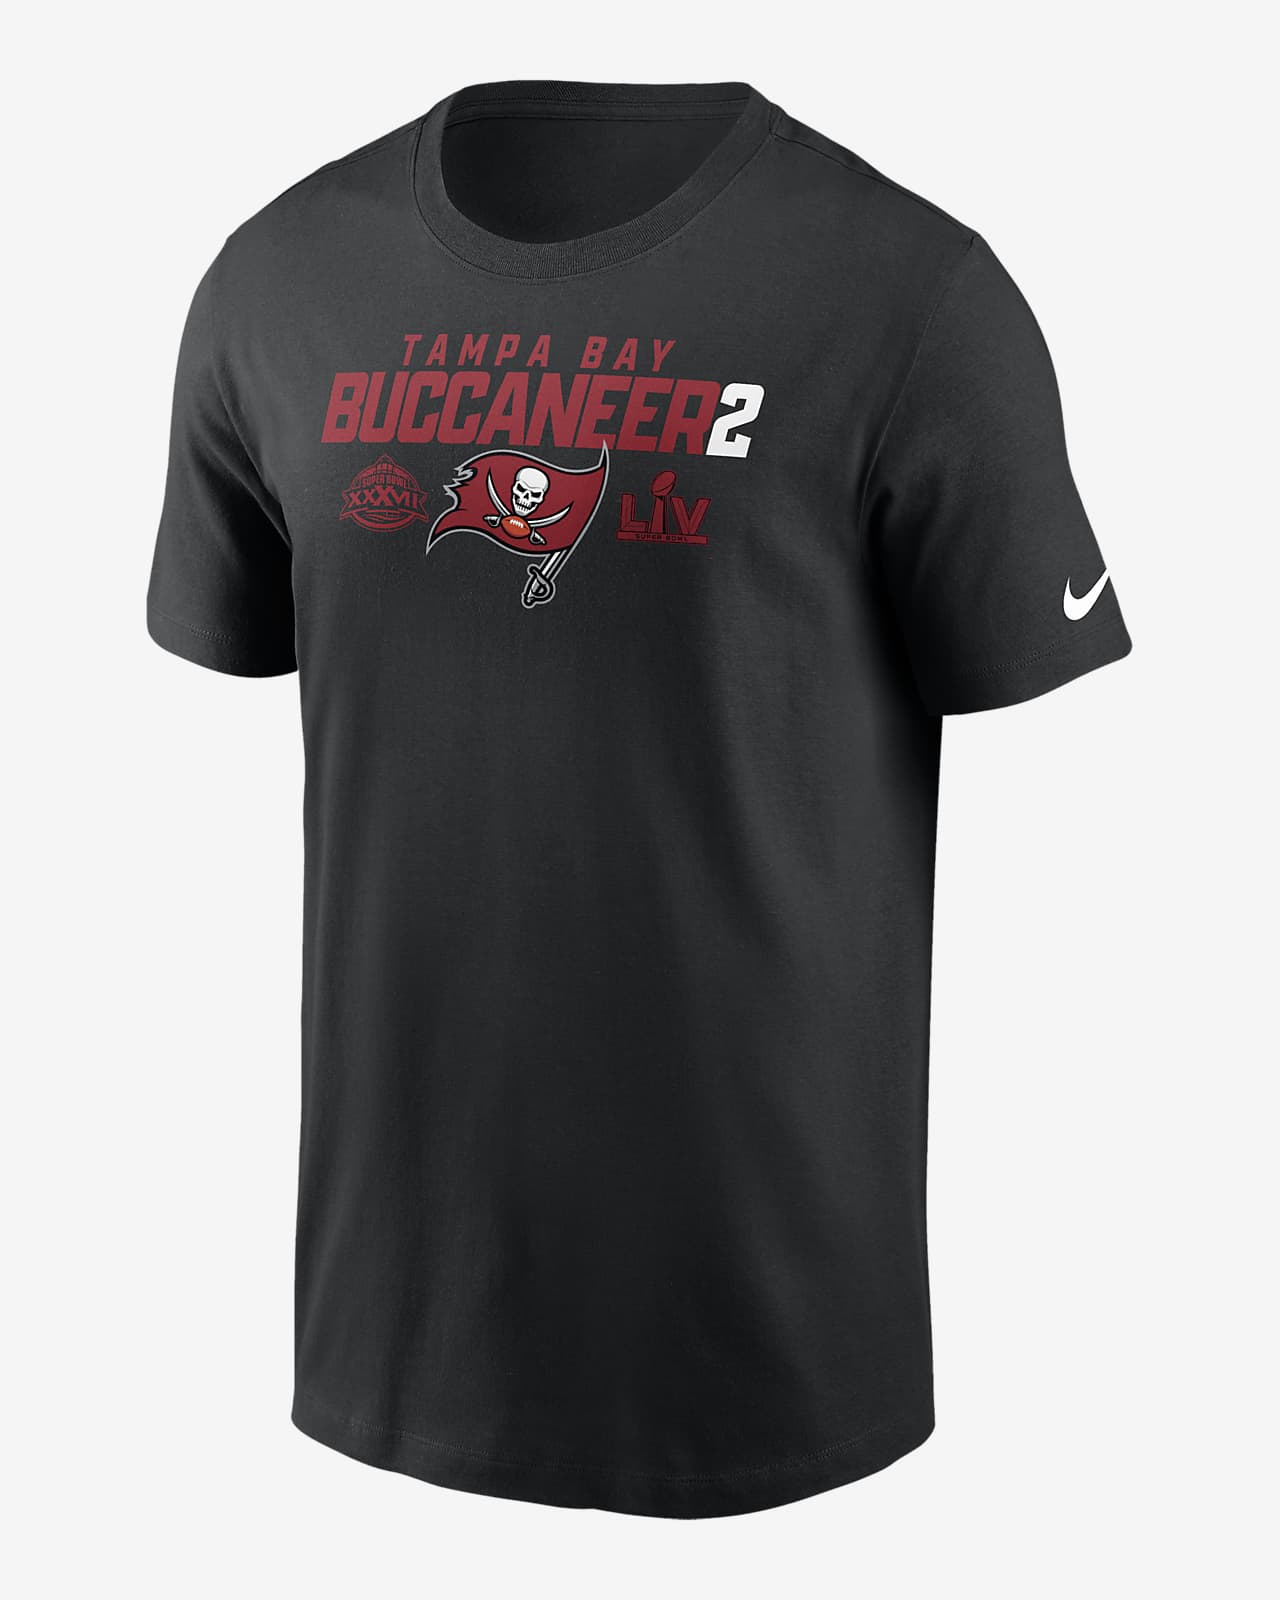 Men's Nike Black Tampa Bay Buccaneers Local Essential T-Shirt Size: Small